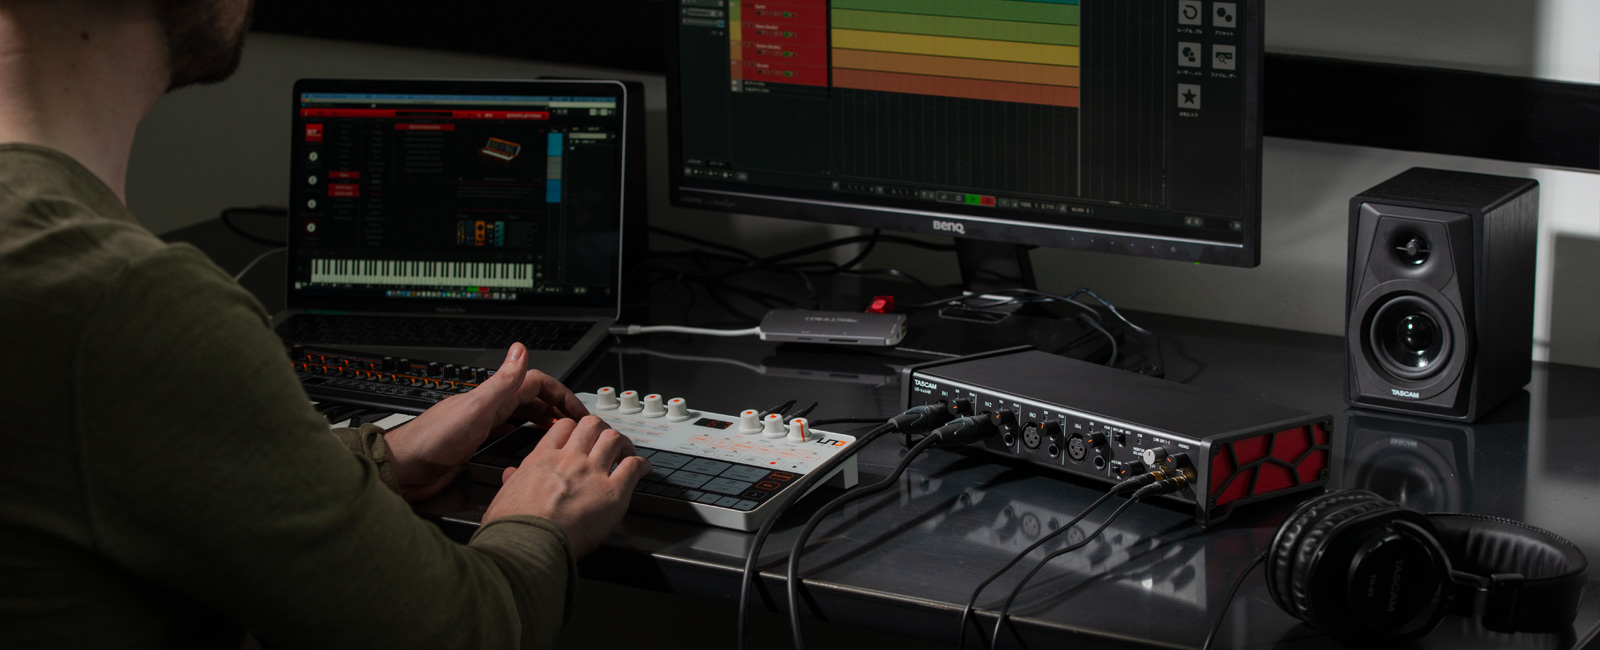 TASCAM Debuts the US-HR Series High Resolution USB Audio Interfaces